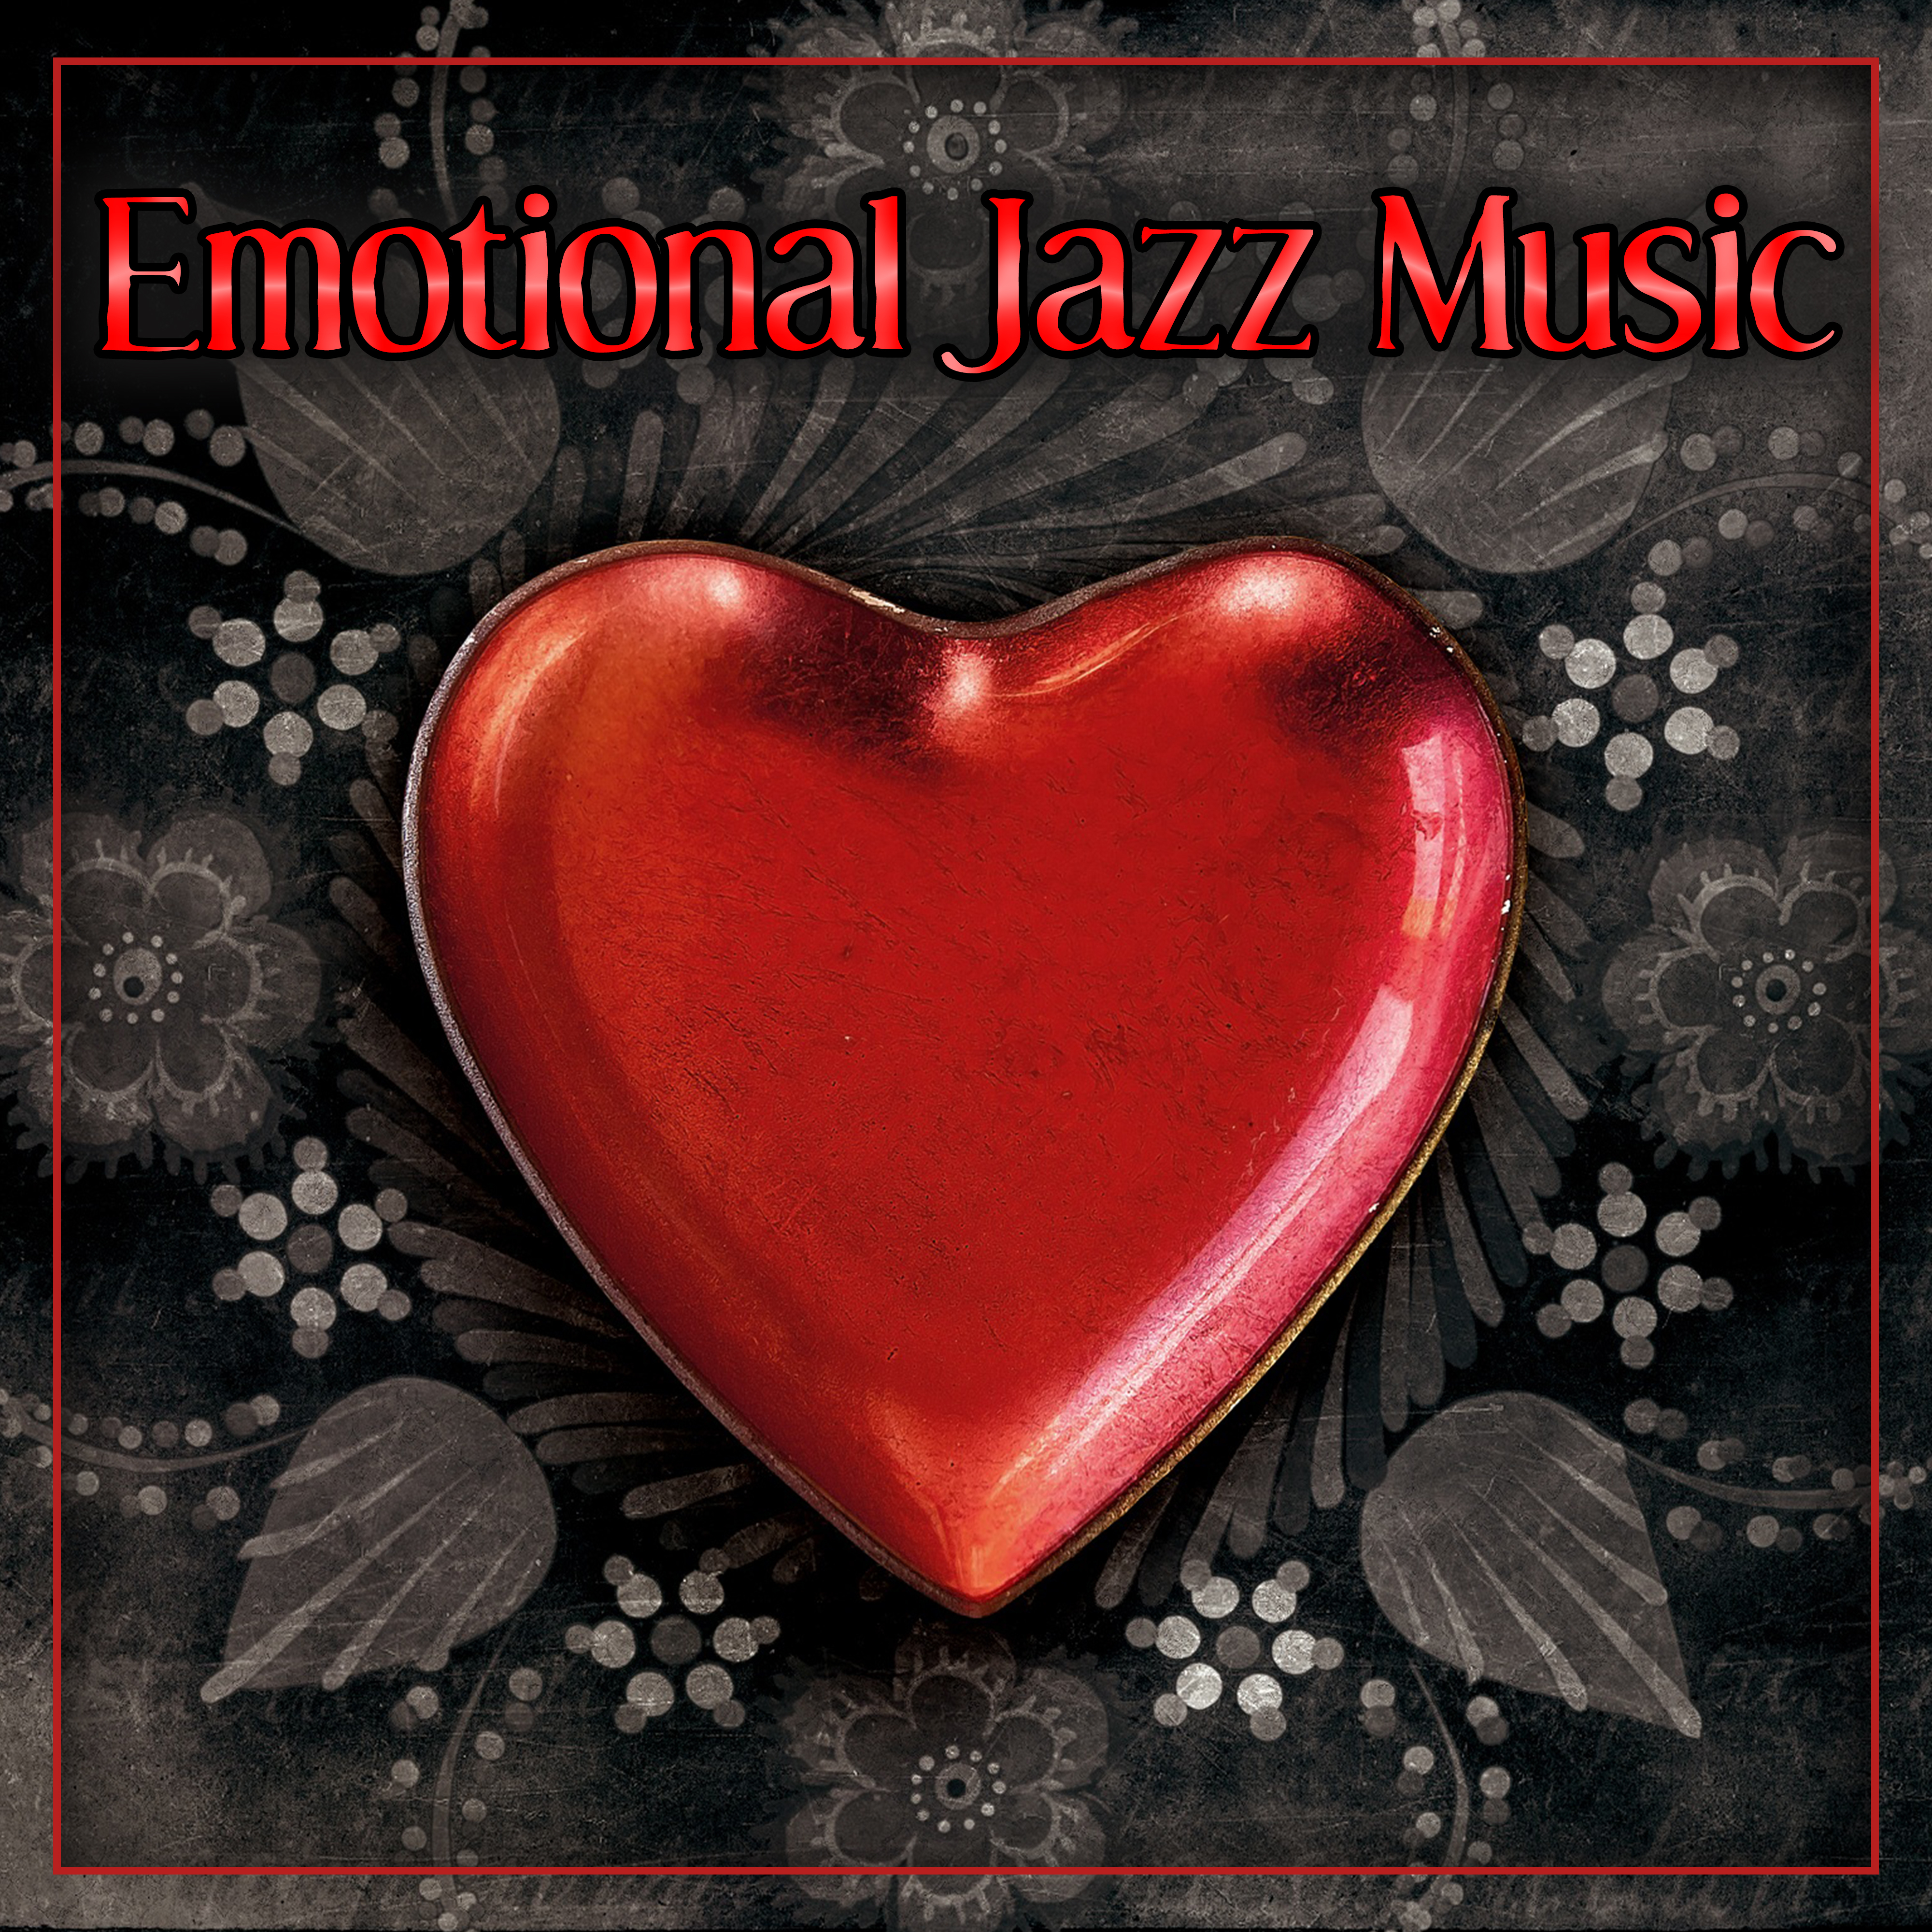 Emotional Jazz Music  Smooth Jazz for Lovers, Secret Love, Romantic Jazz, Falling In Love, Candle Light, Dinner for Two, Mellow Jazz